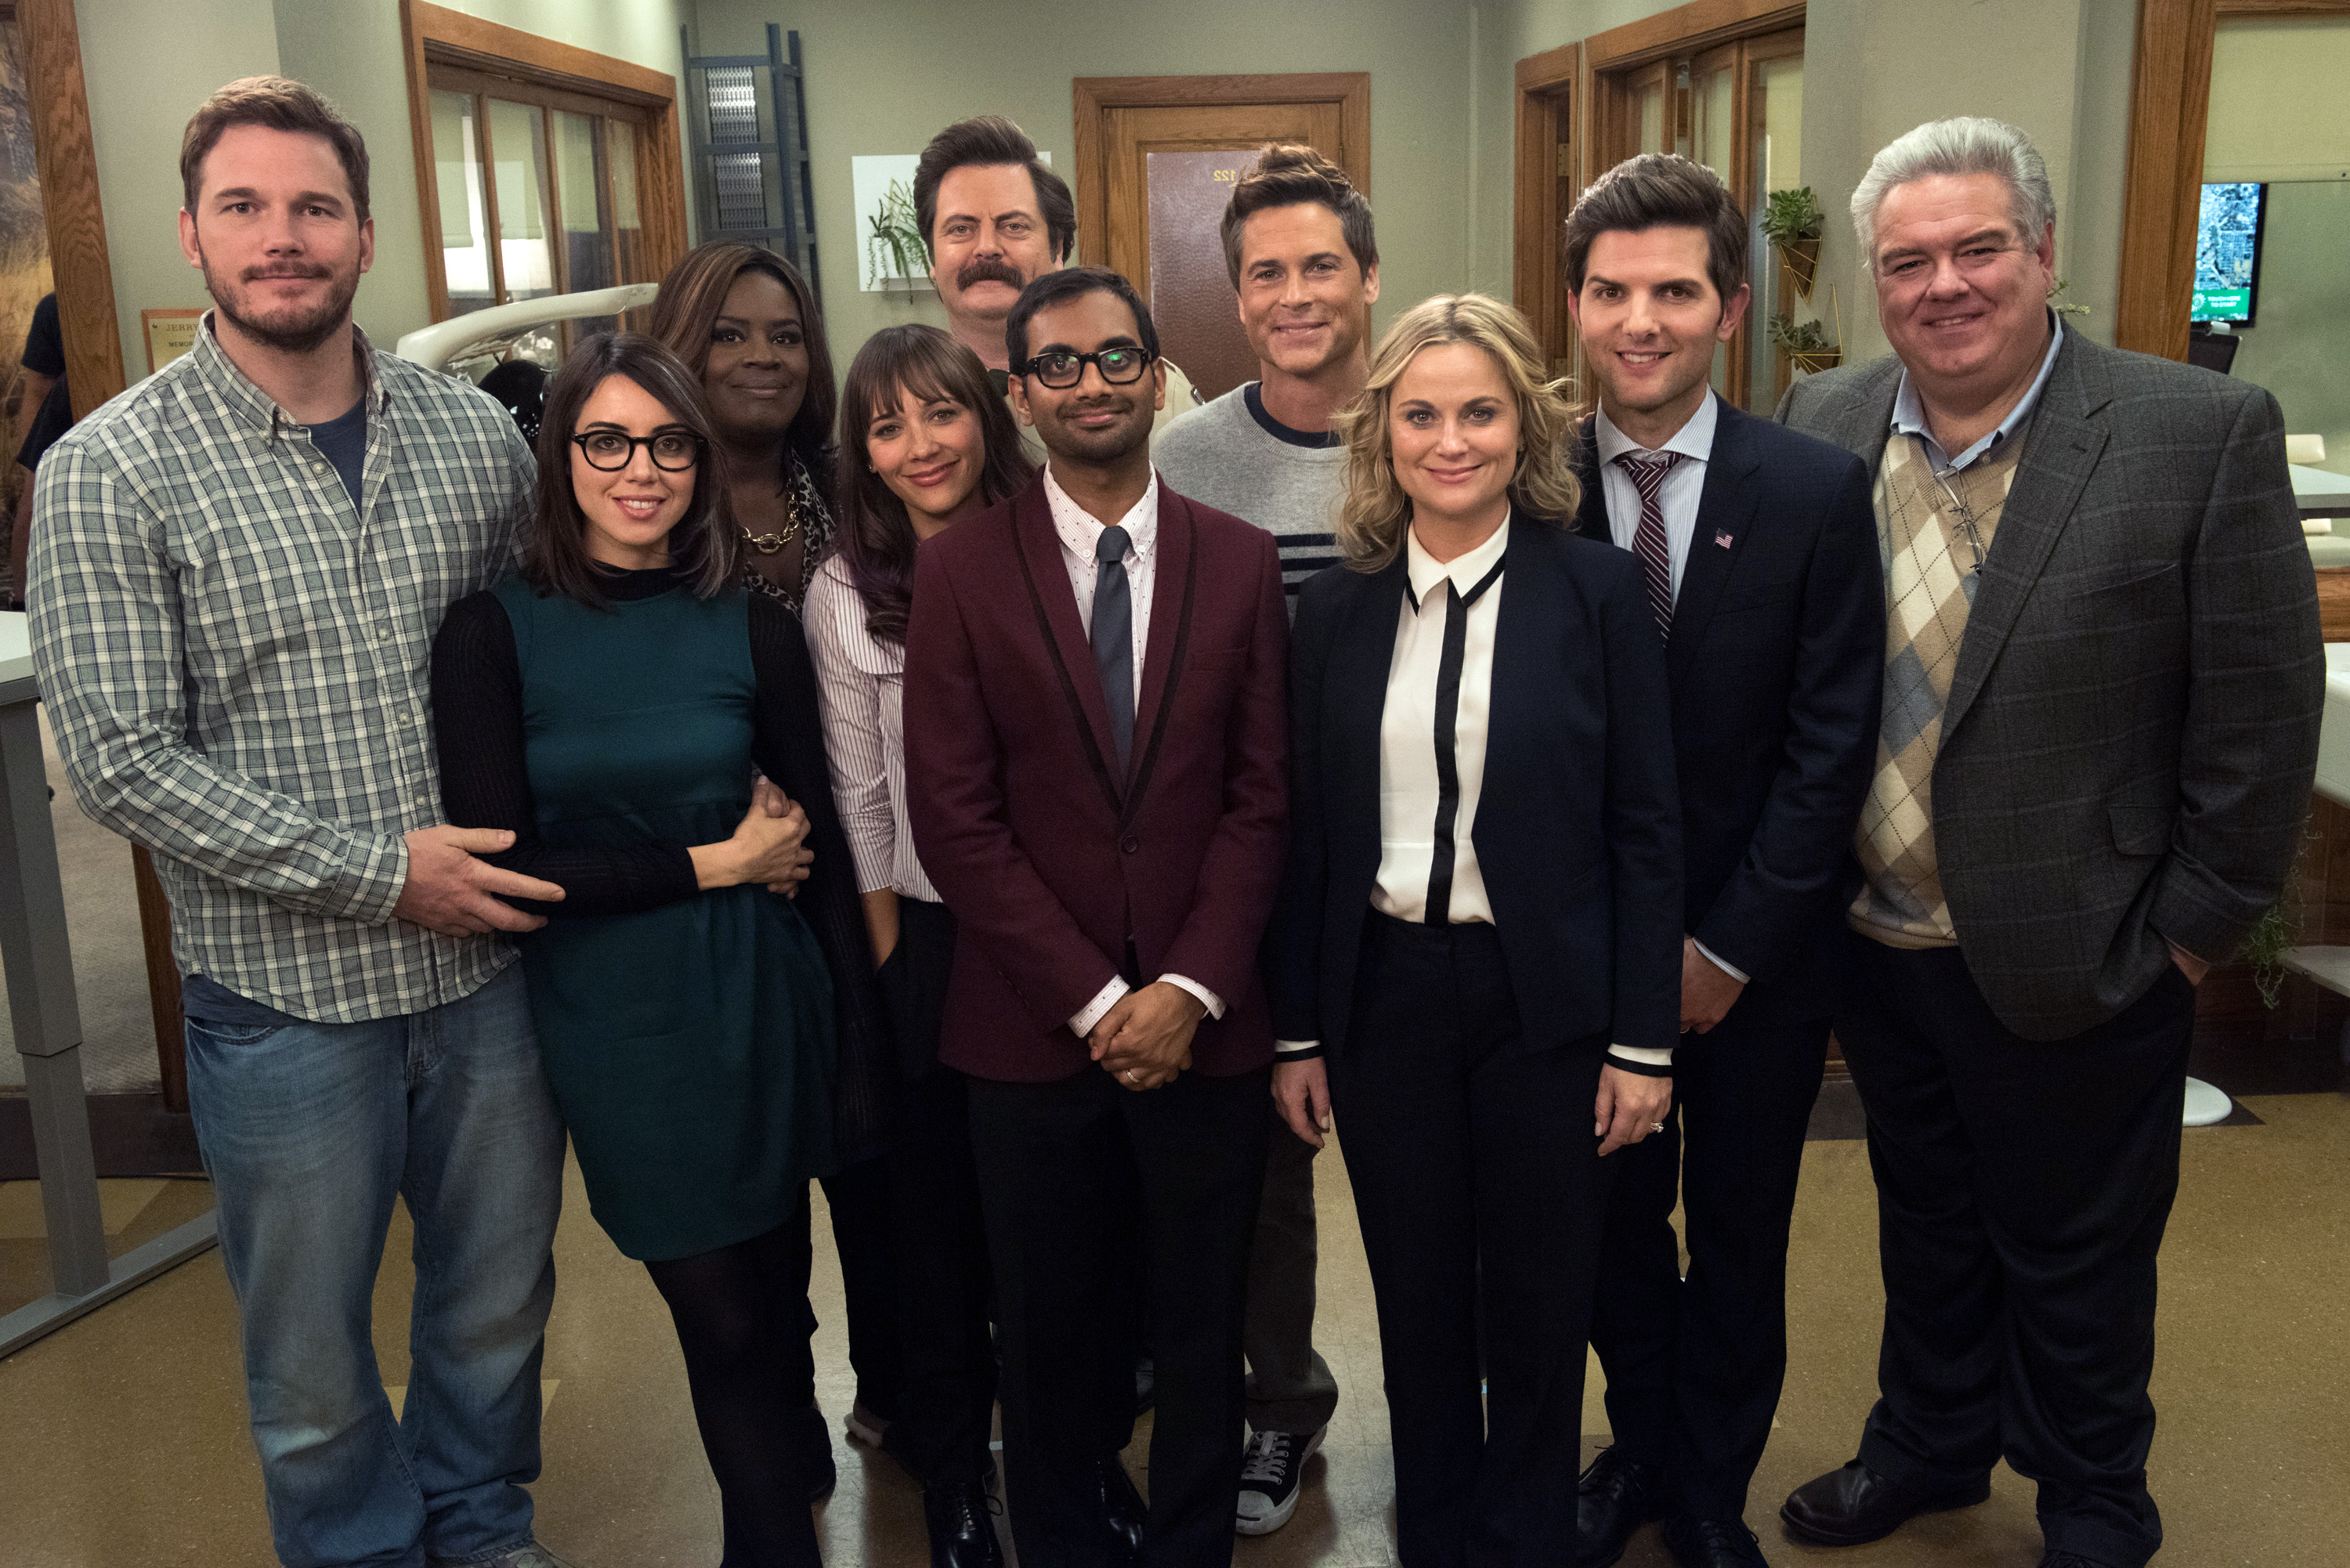 The cast of 'Parks and Recreation' in the show's 7th season. (NBCU Photo Bank/NBCUniversal via&mdash;2014 NBCUniversal Media, LLC)